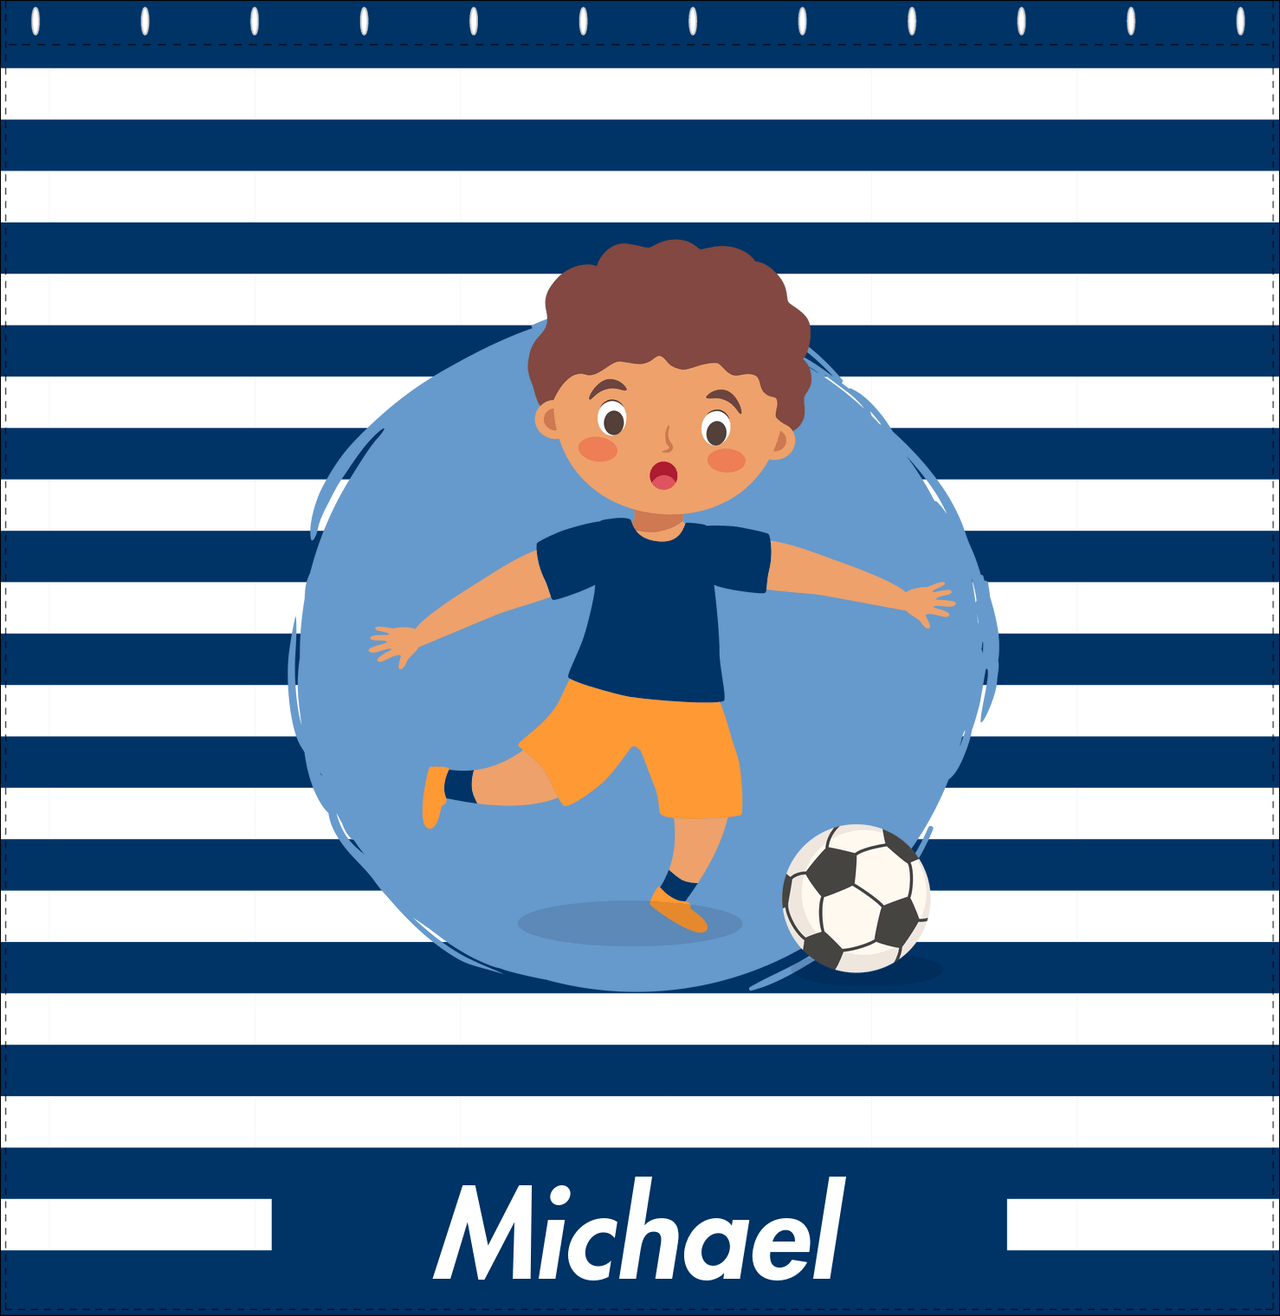 Personalized Soccer Shower Curtain XXIV - Blue Background - Black Boy - Decorate View